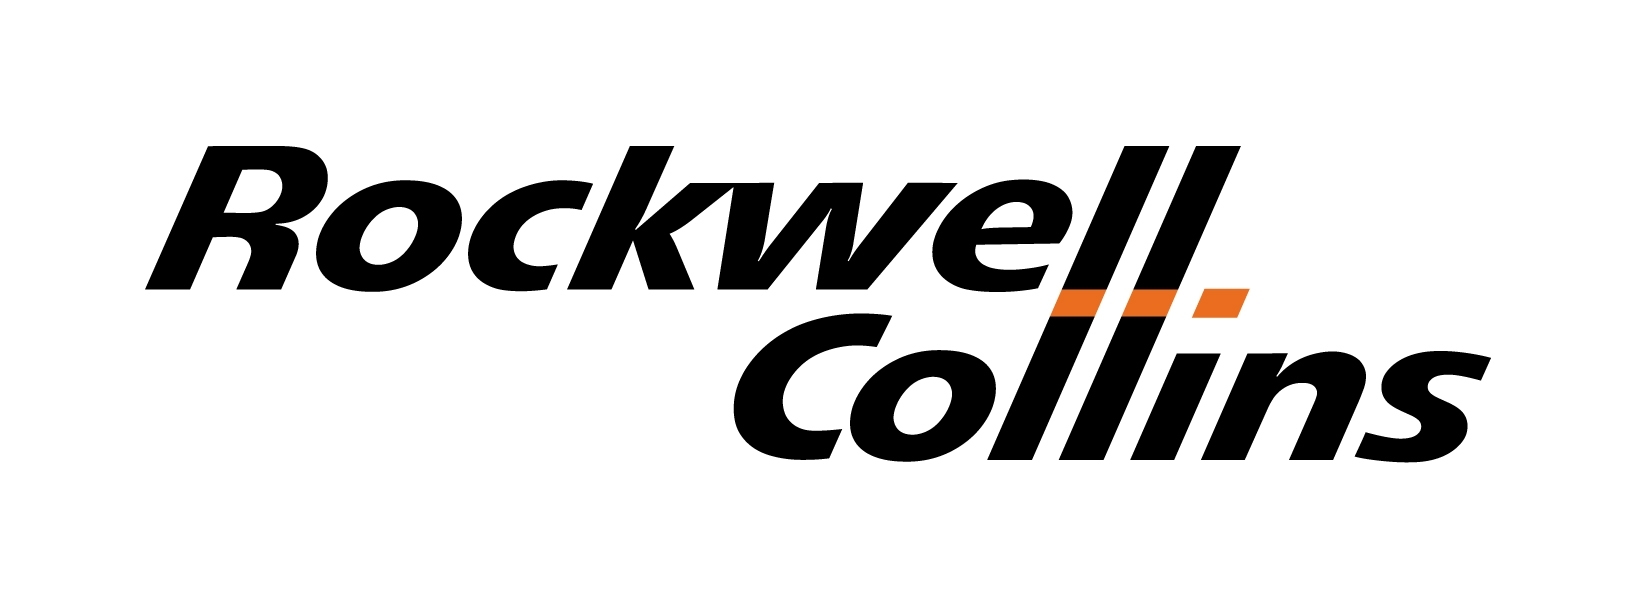 Rockwell Collins, Inc